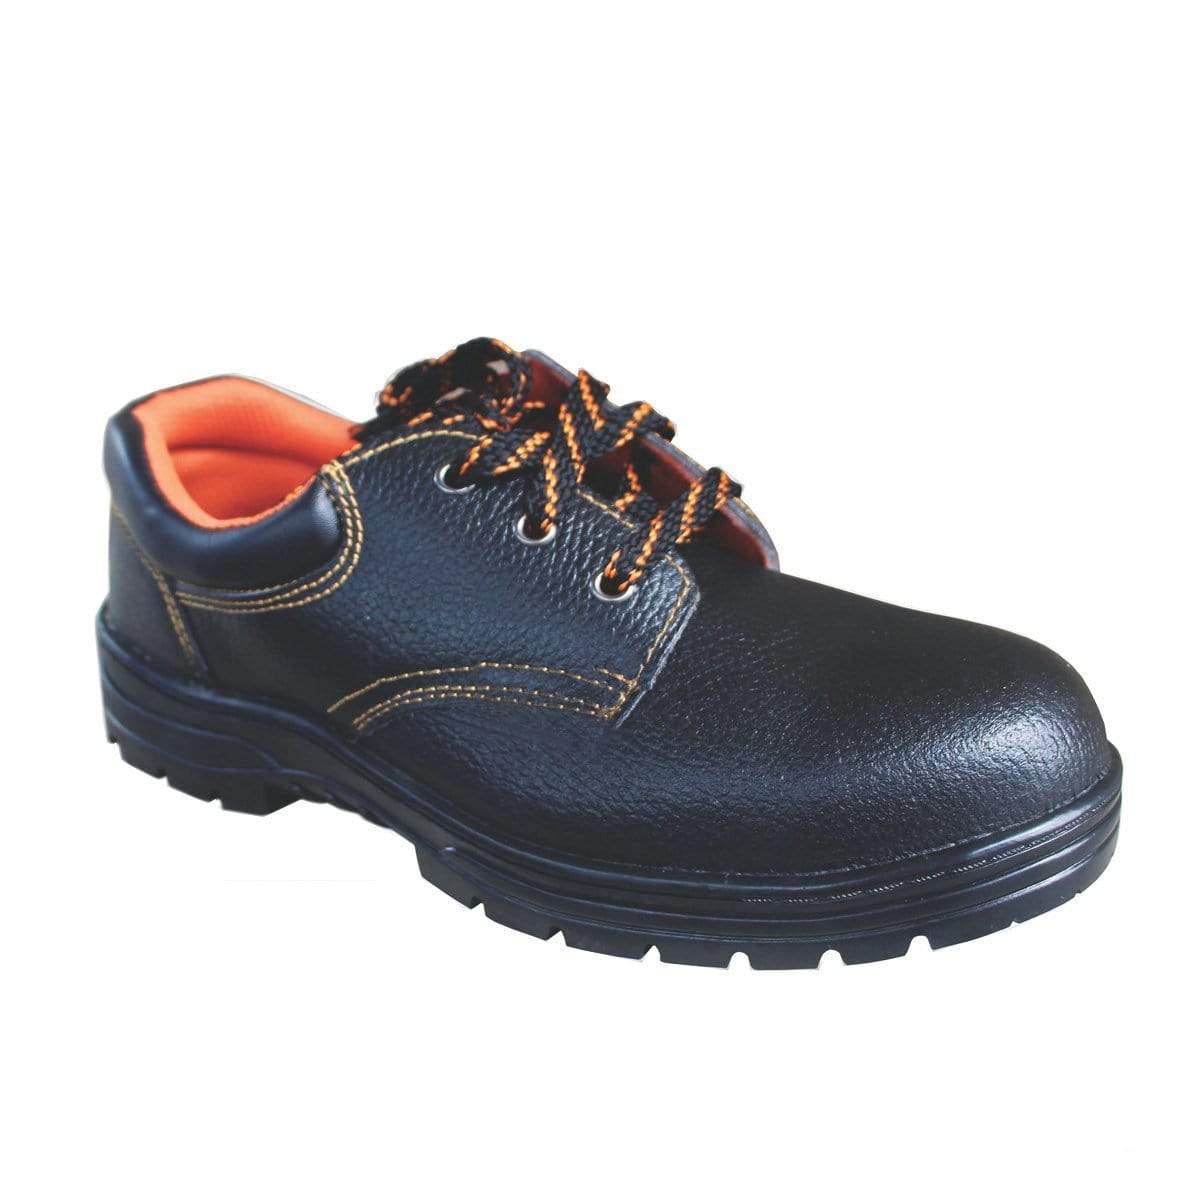 ANEKA Worker Safety Shoes Safety Boots Steel Toe Cap Kasut UK4 1000#